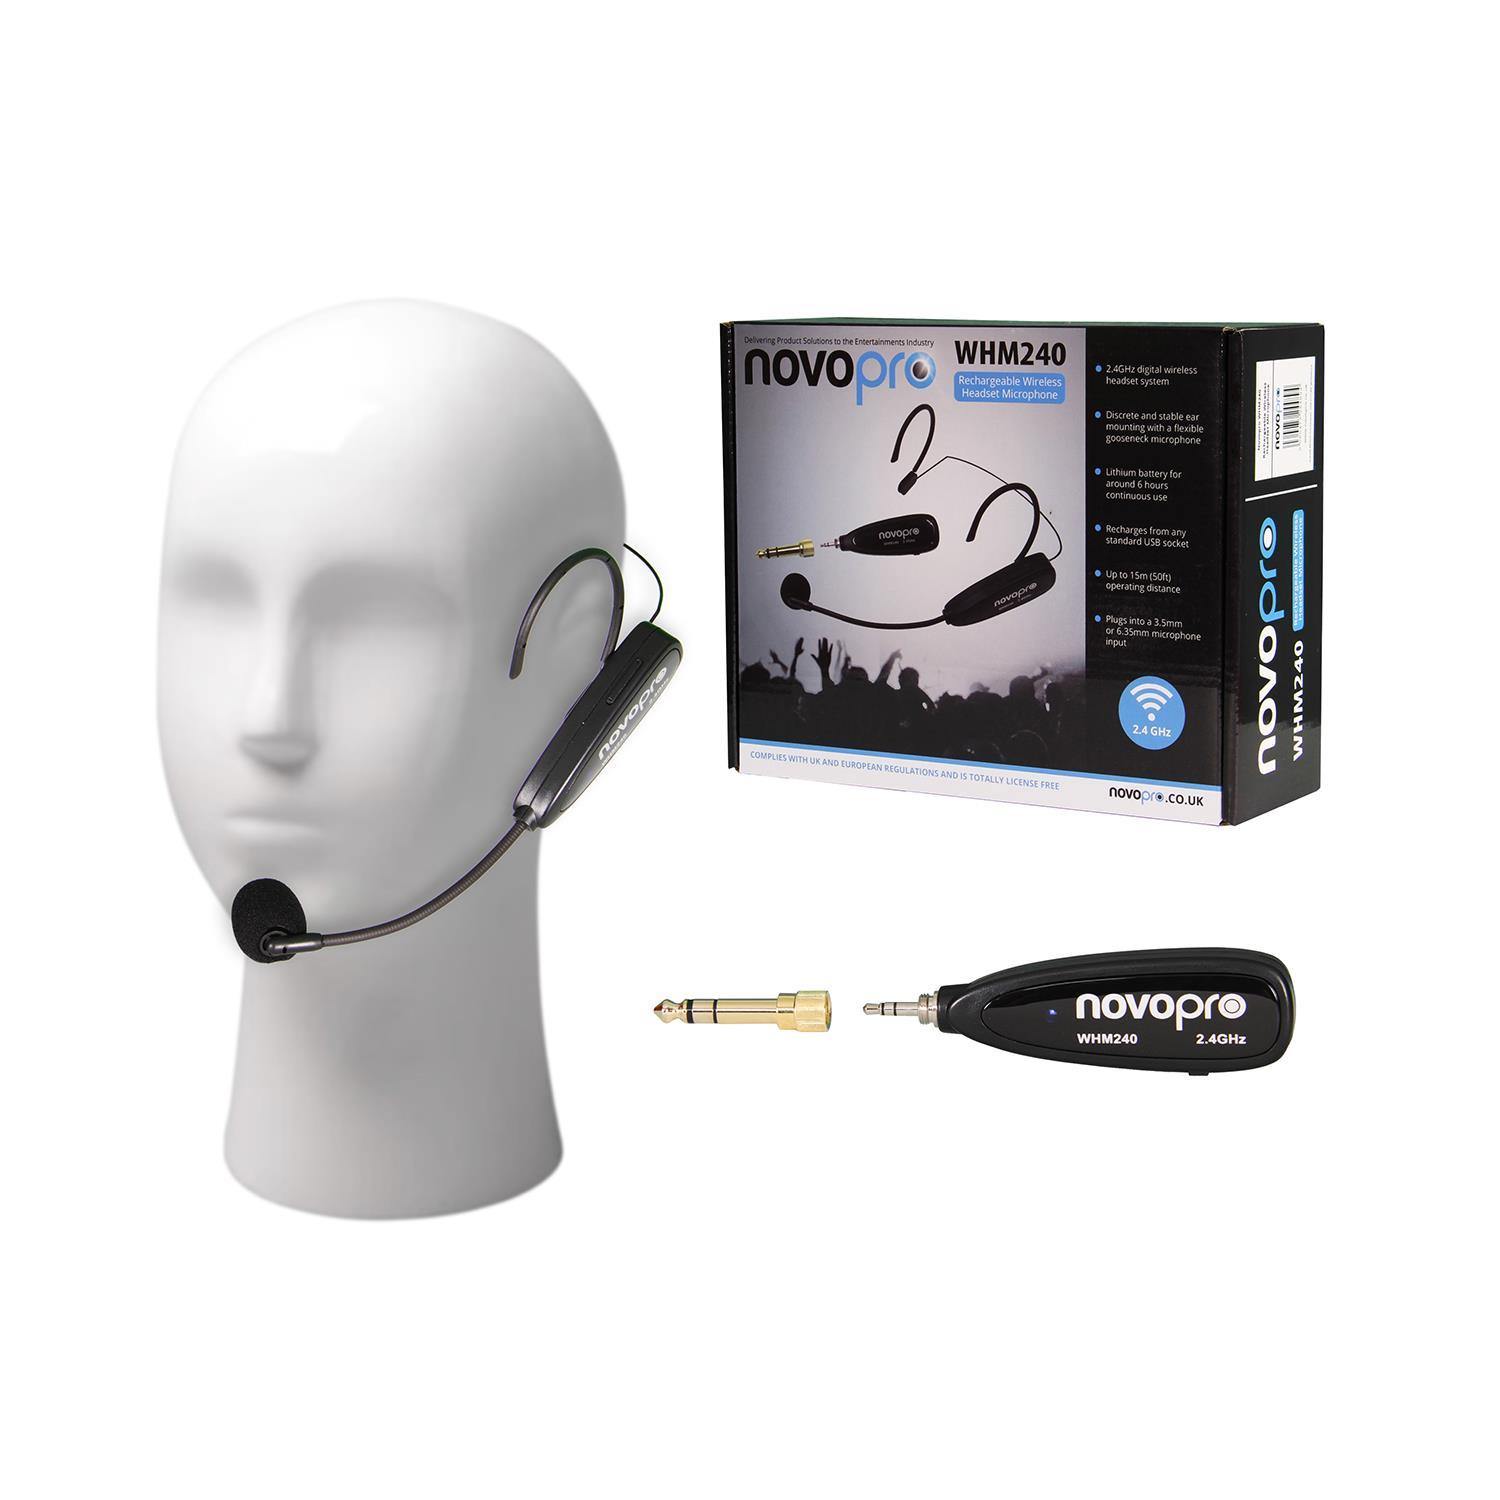 Novopro WHM240 Rechargeable 2.4Ghz headset microphone - DY Pro Audio